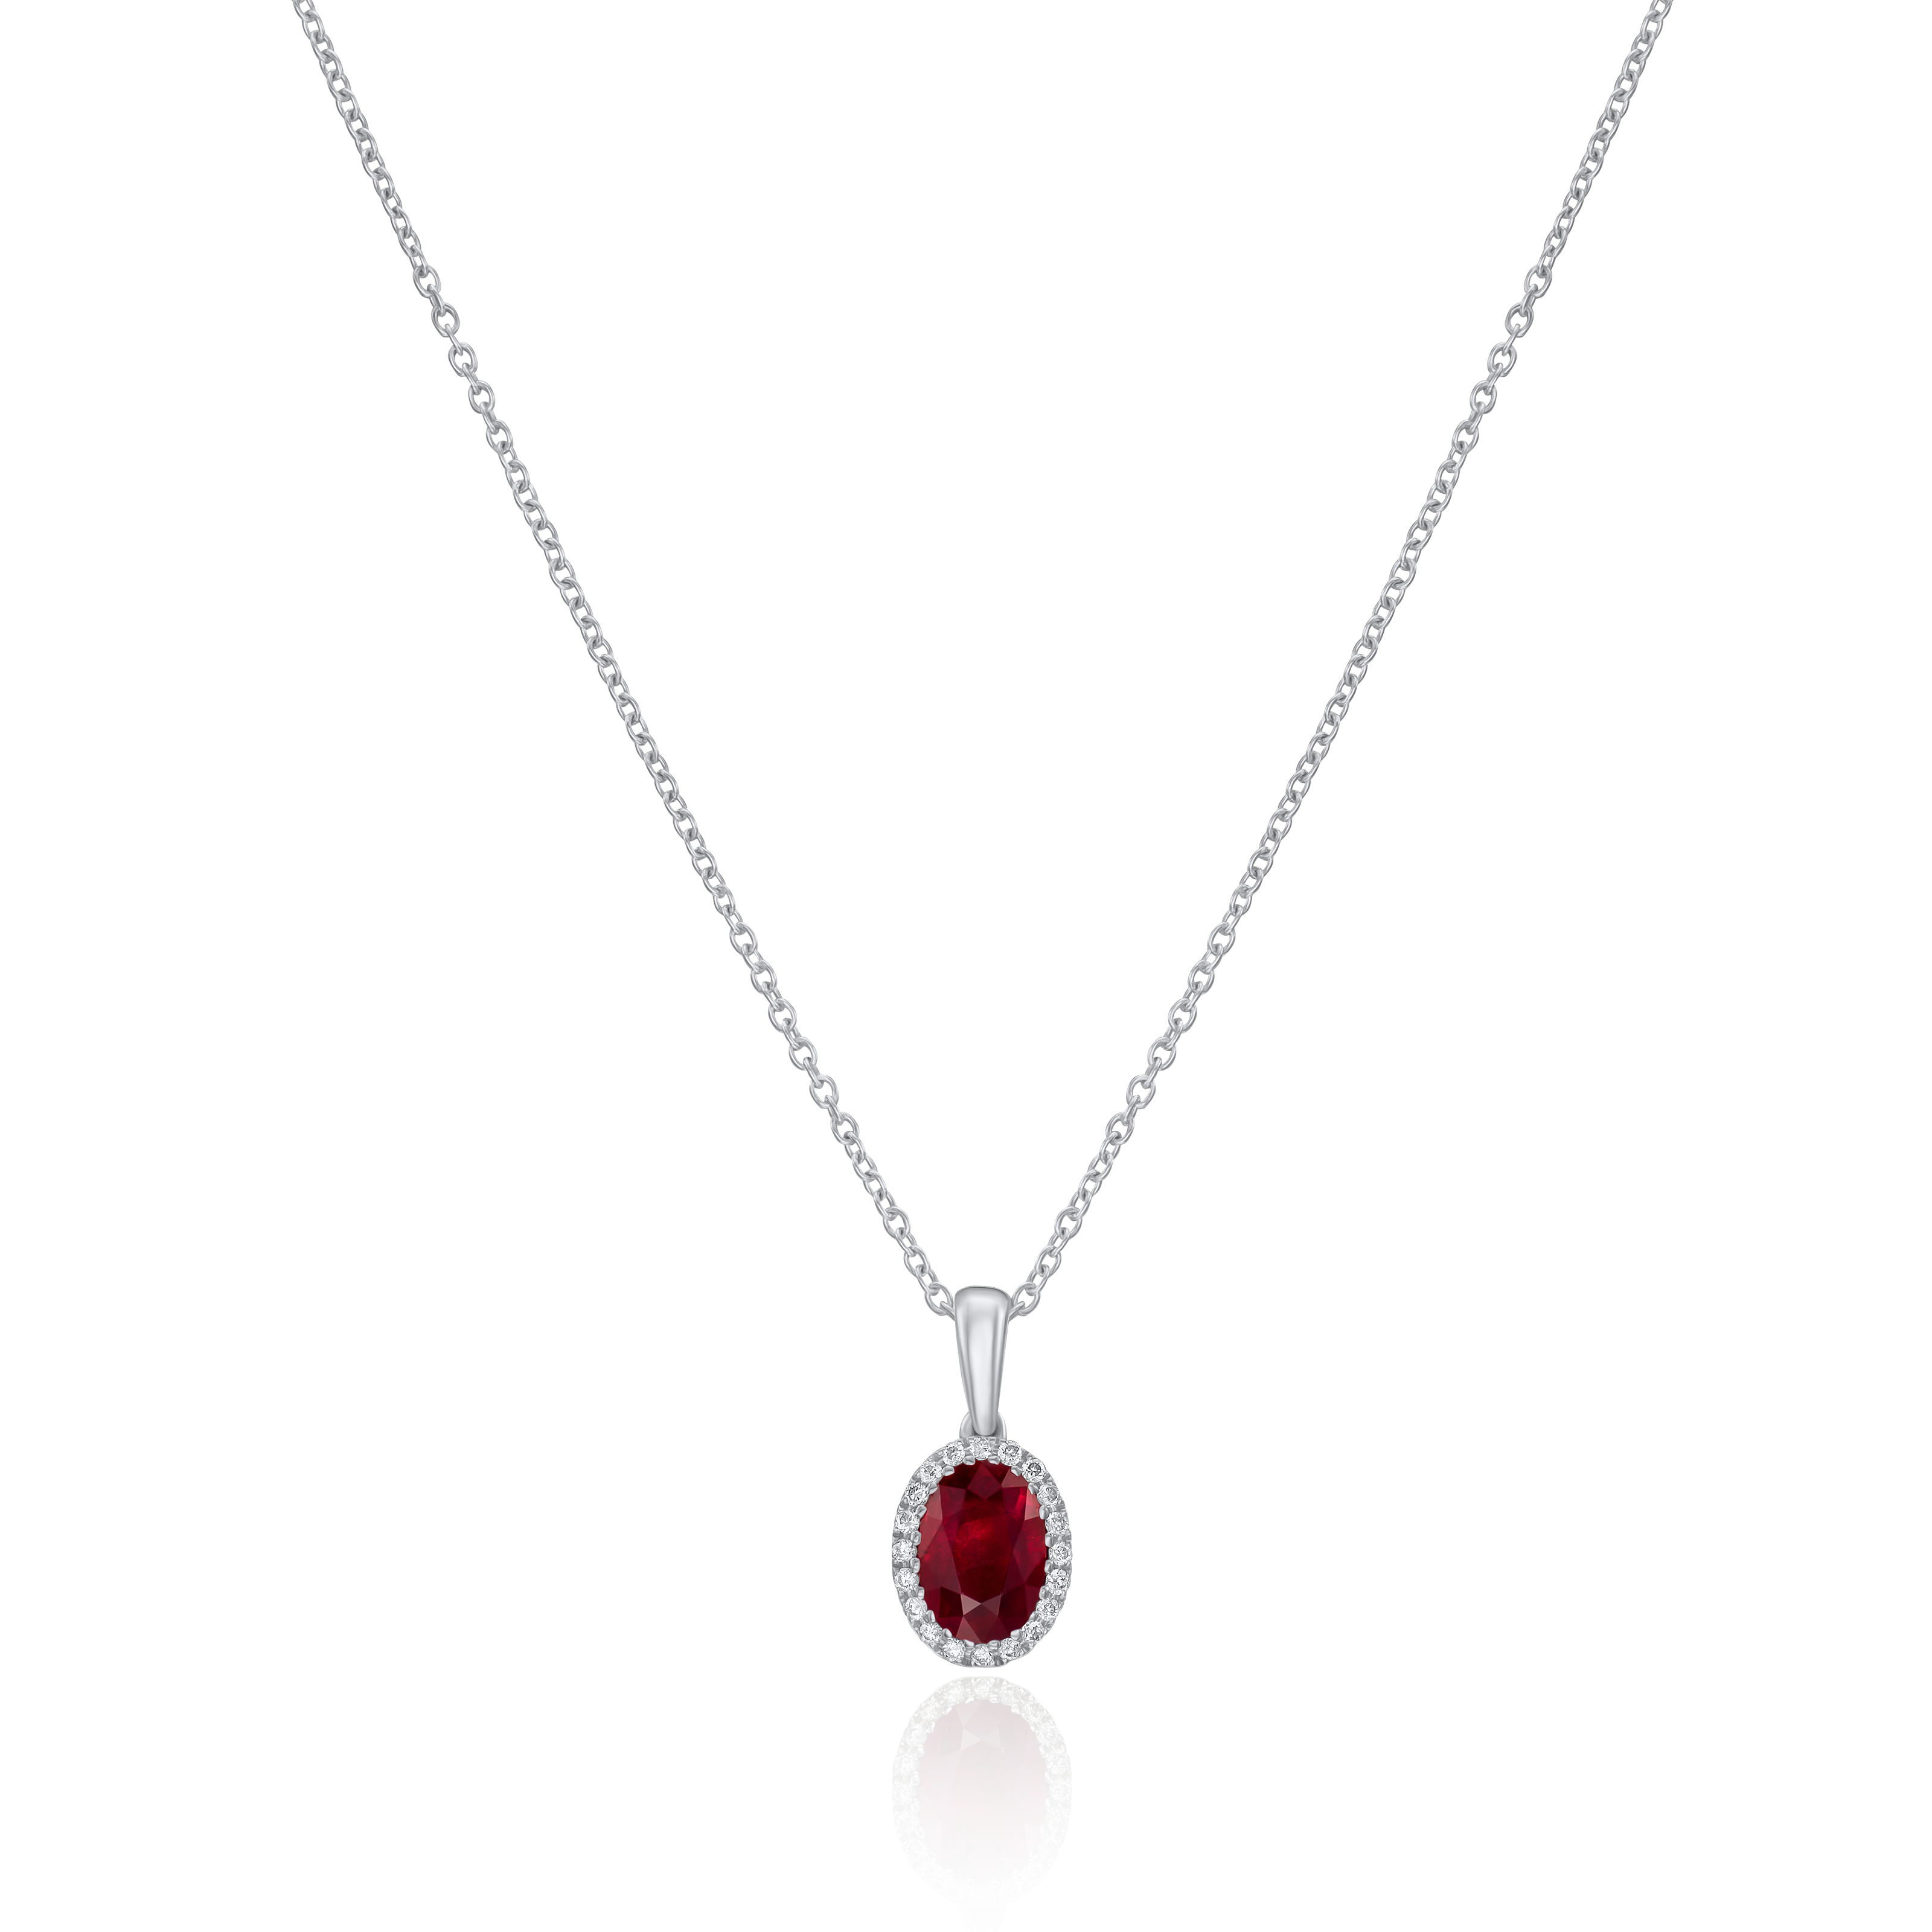 1.03cts Ruby and Diamond Pendant